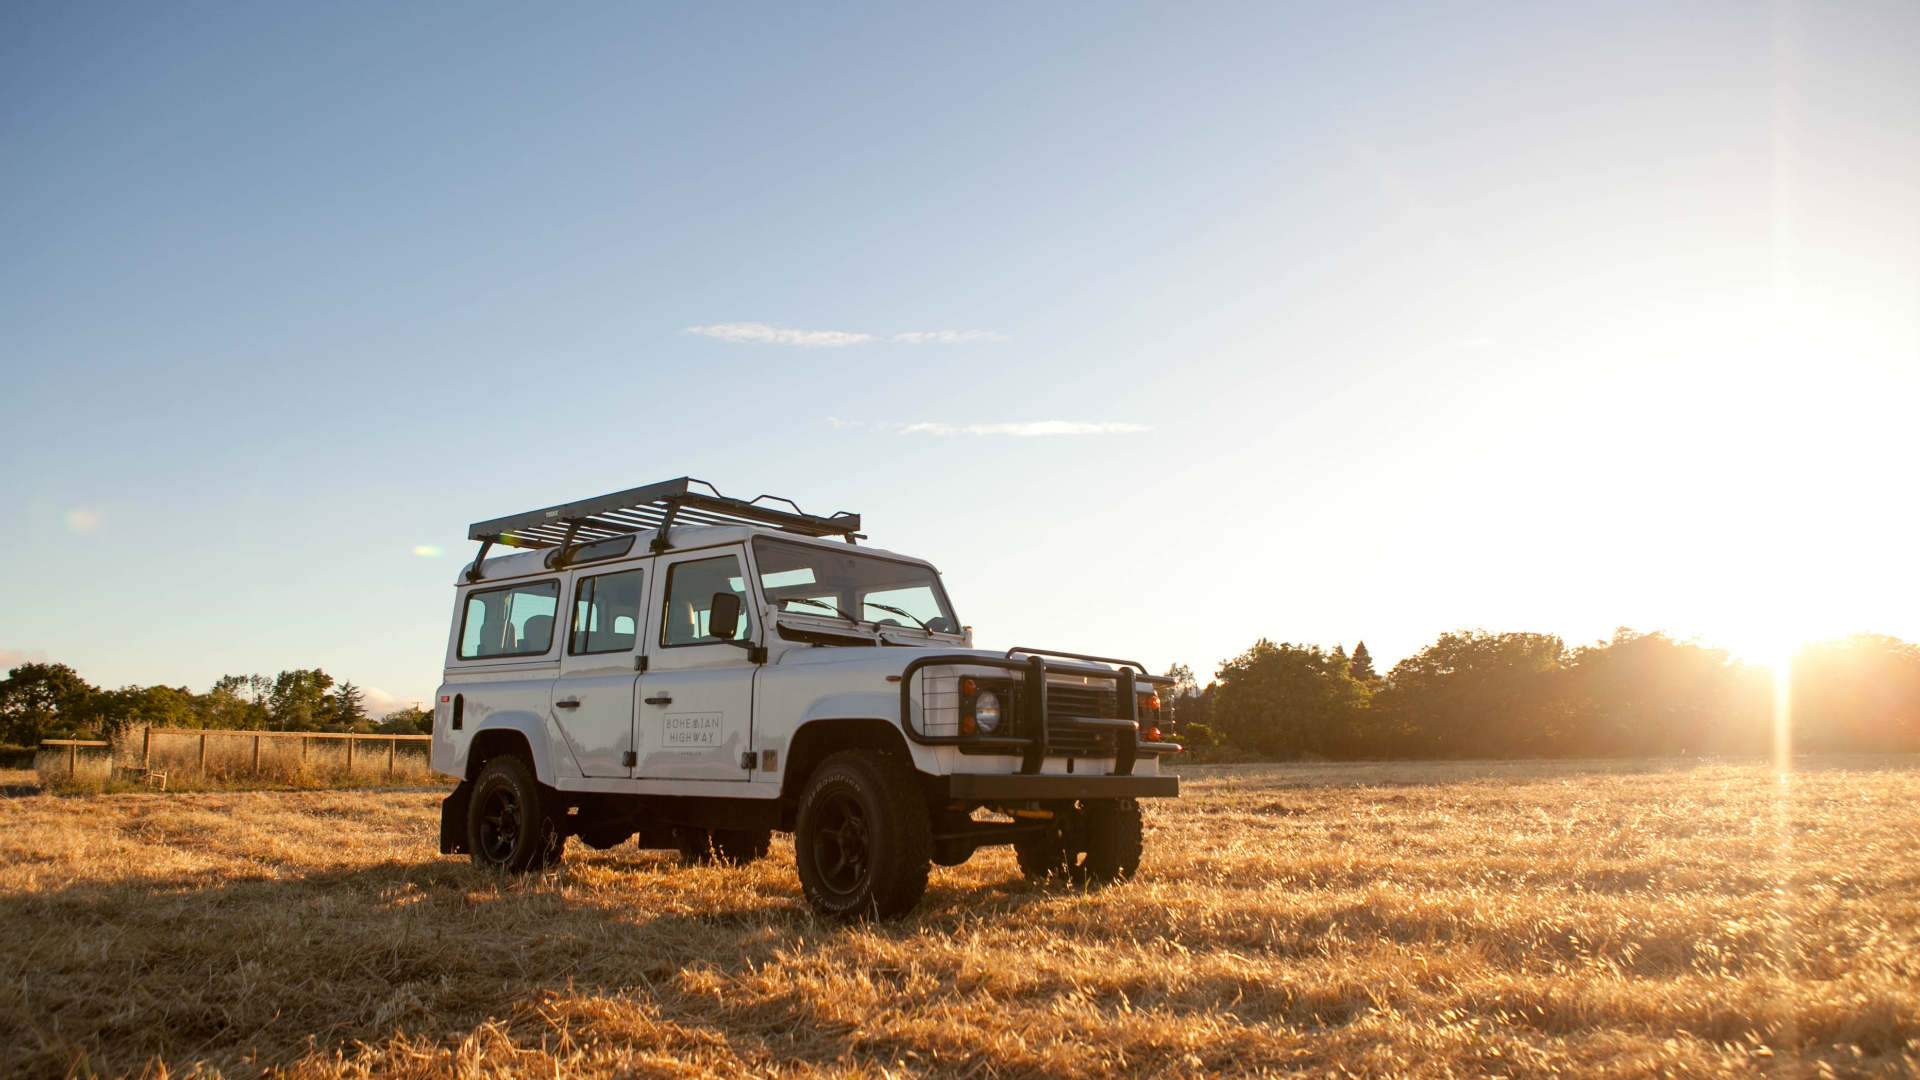 Join a bespoke winery tour in a retro SUV with <a href="https://www.sonomacounty.com/sightseeing-tours/bohemian-highway-travel-co">Bohemian Highway Travel Co</a>